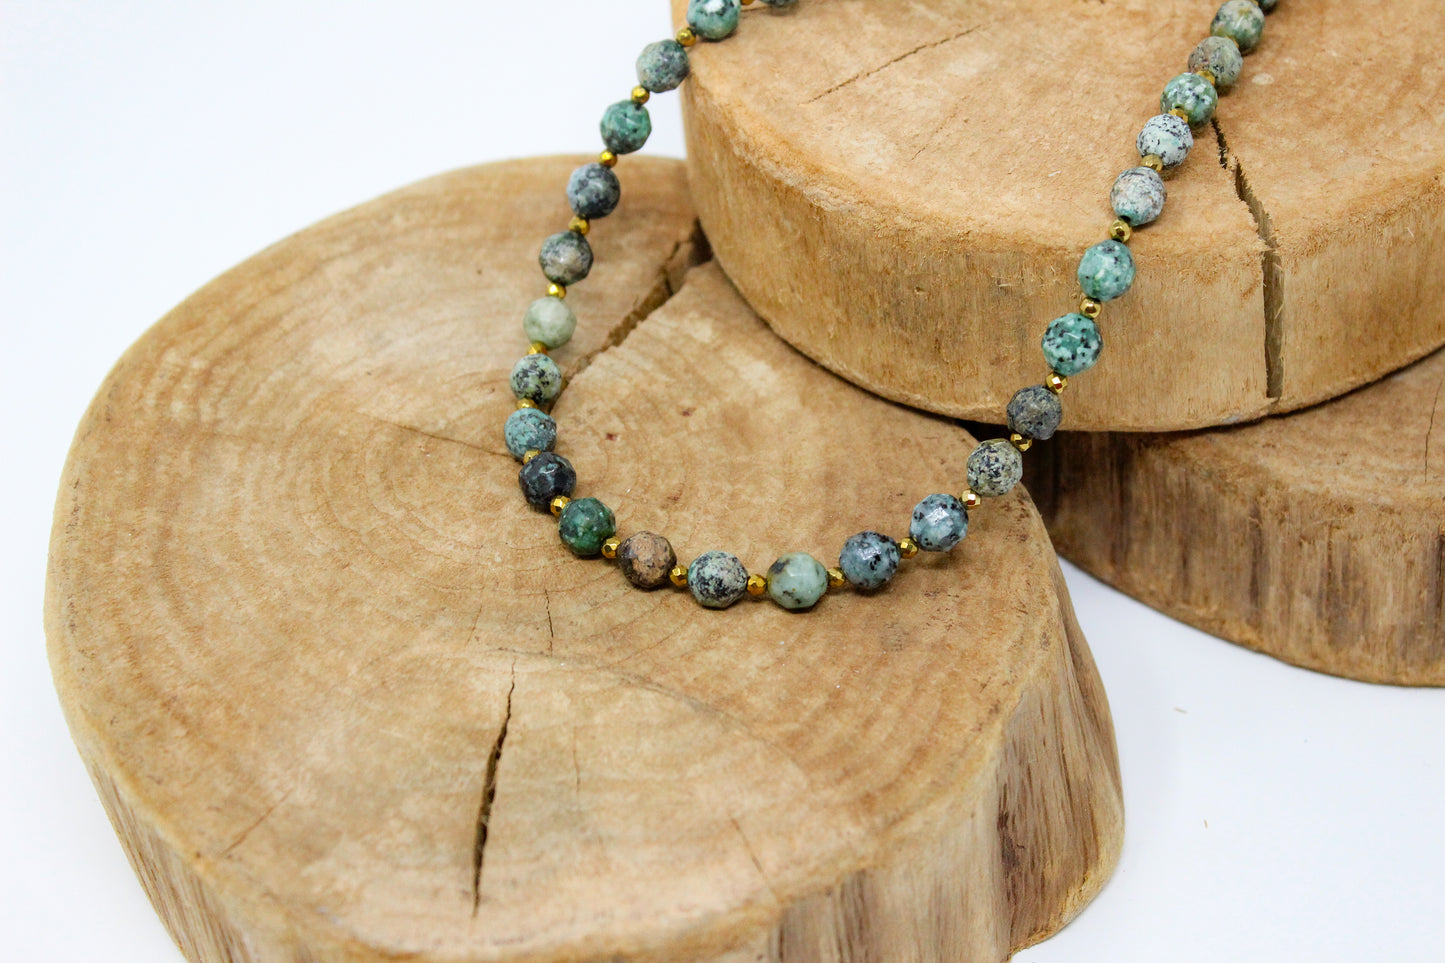 8mm Shades of Green Rock Bead Necklace